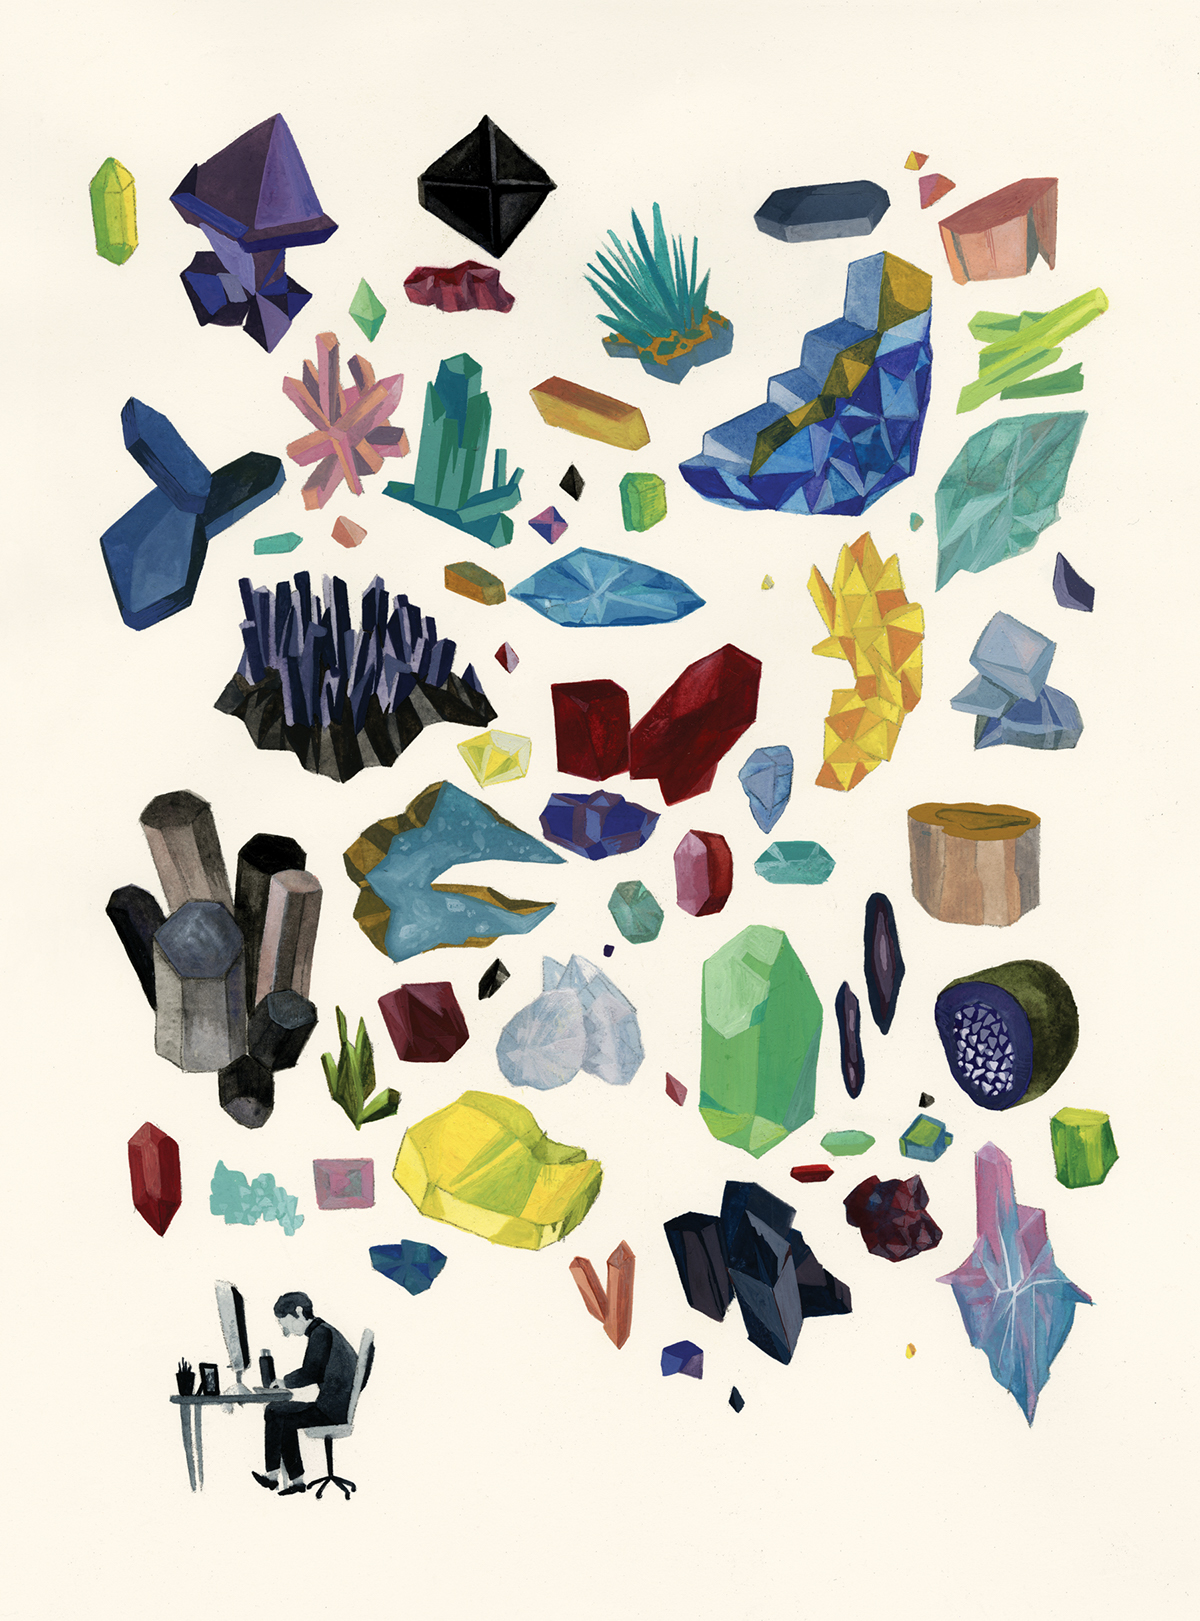 gouache minerals Gems rocks crystals geology Careers